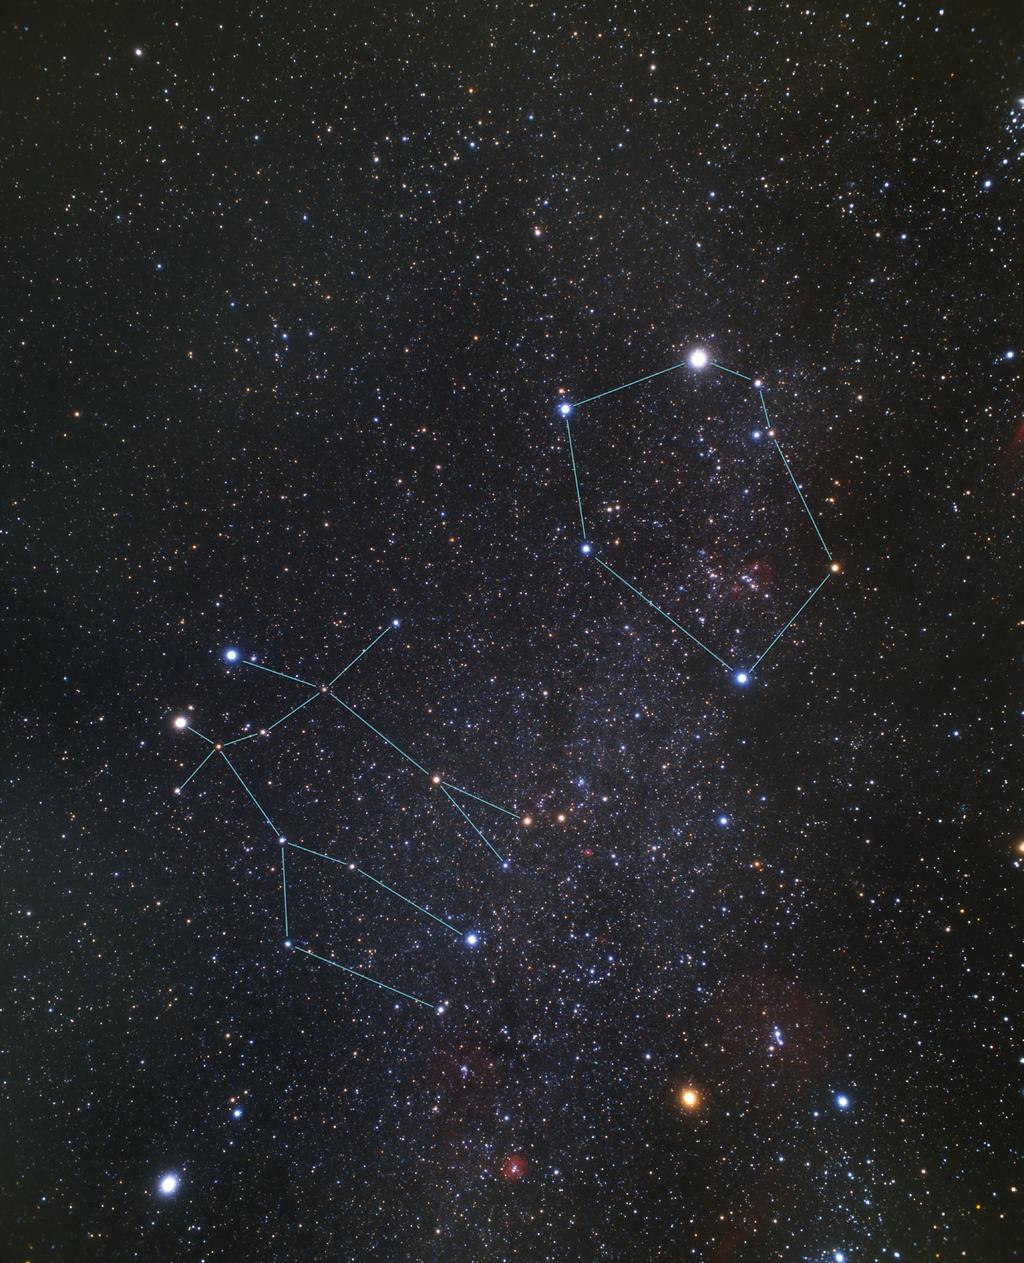 WASP-12, a star located in the center of this image, is located about 600